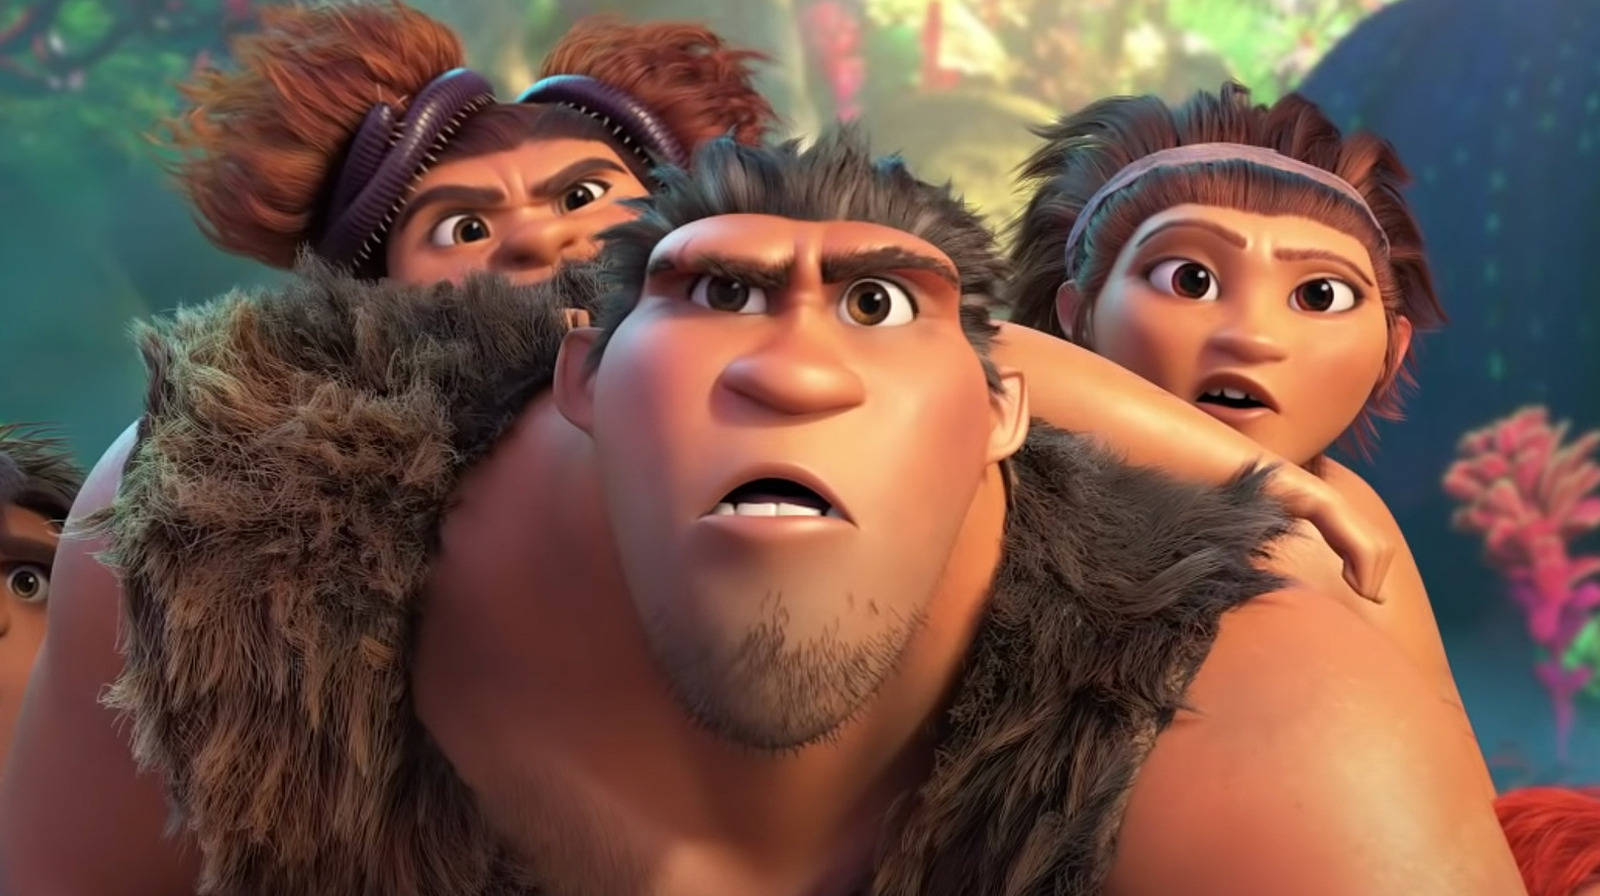 The Croods Characters Confused Faces Wallpaper. 